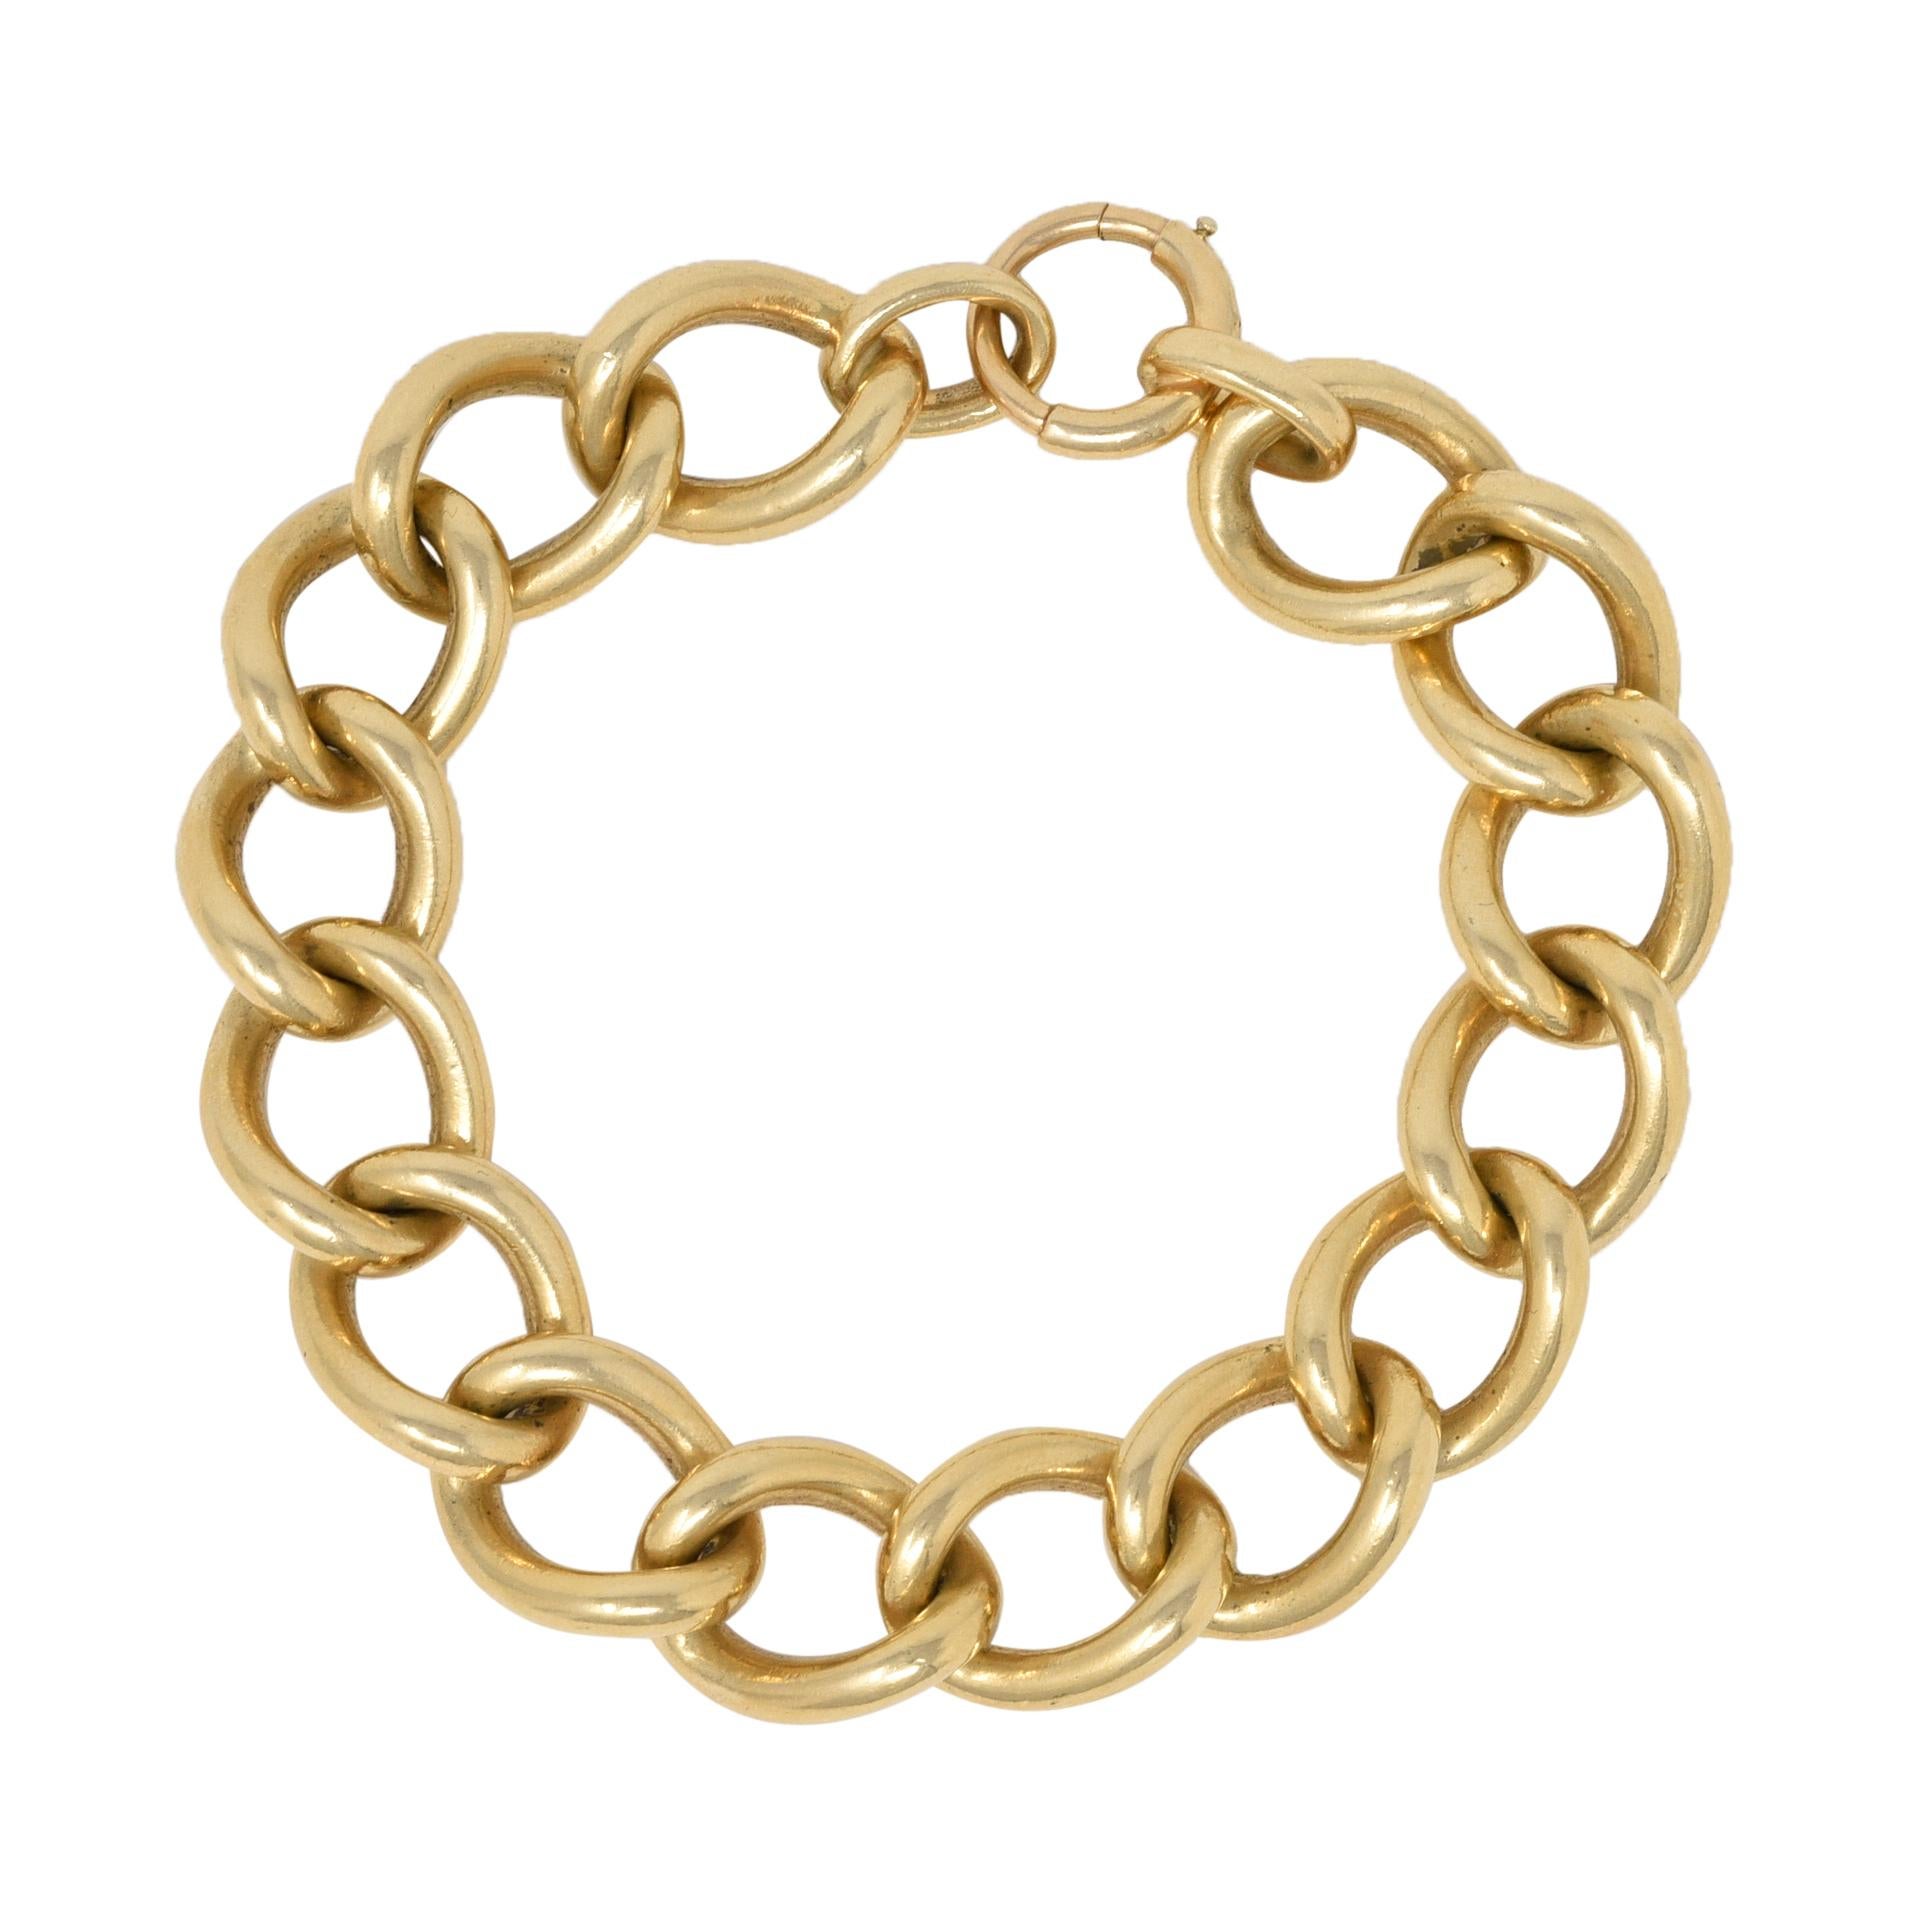 Designed as a curb link style chain 
Comprised of large oval links 
Completed by large spring clasp closure
Stamped for 14 karat gold 
Fully signed for Tiffany & Co.
Circa: 1890
Width: 1/2 inch
Bracelet size: 7 inch circumference with 3 inch